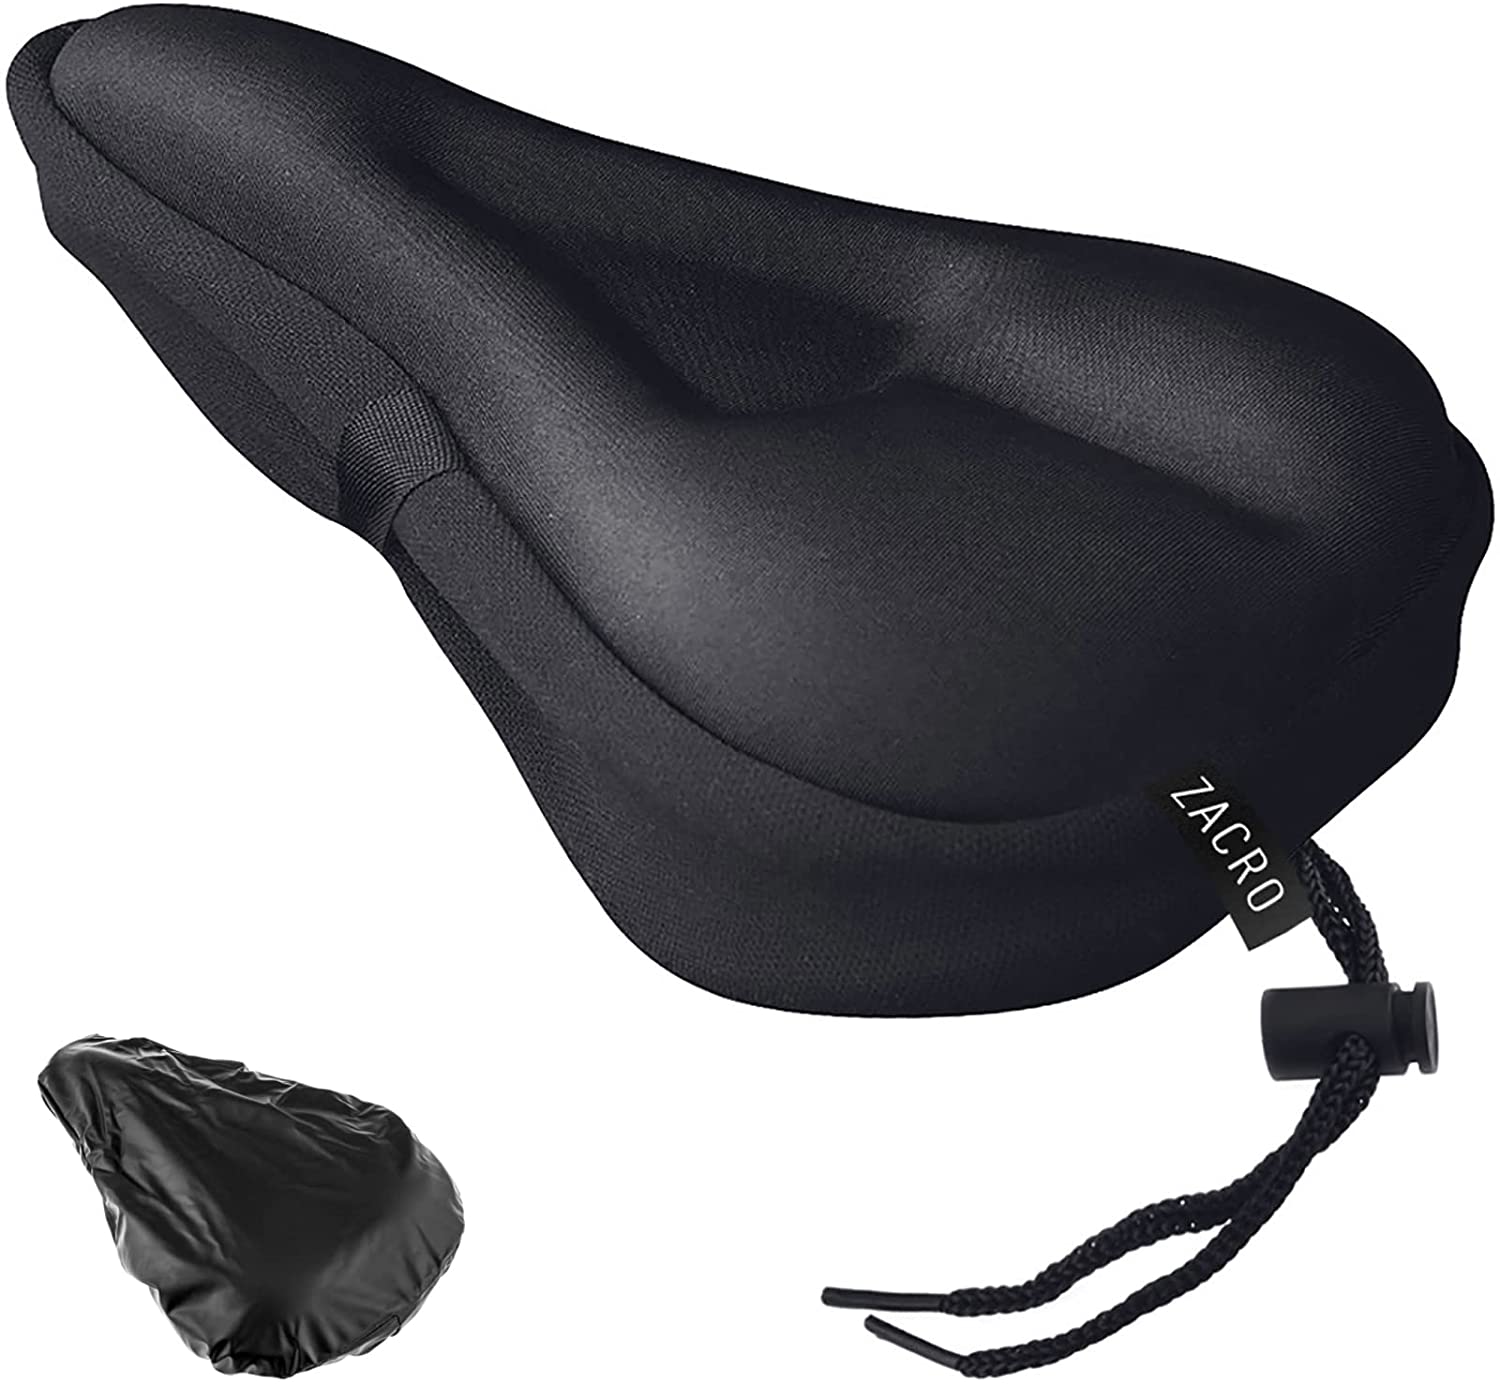 A gel padded seat cover like this provides extra protection against numbness while you ride your mountain bike.